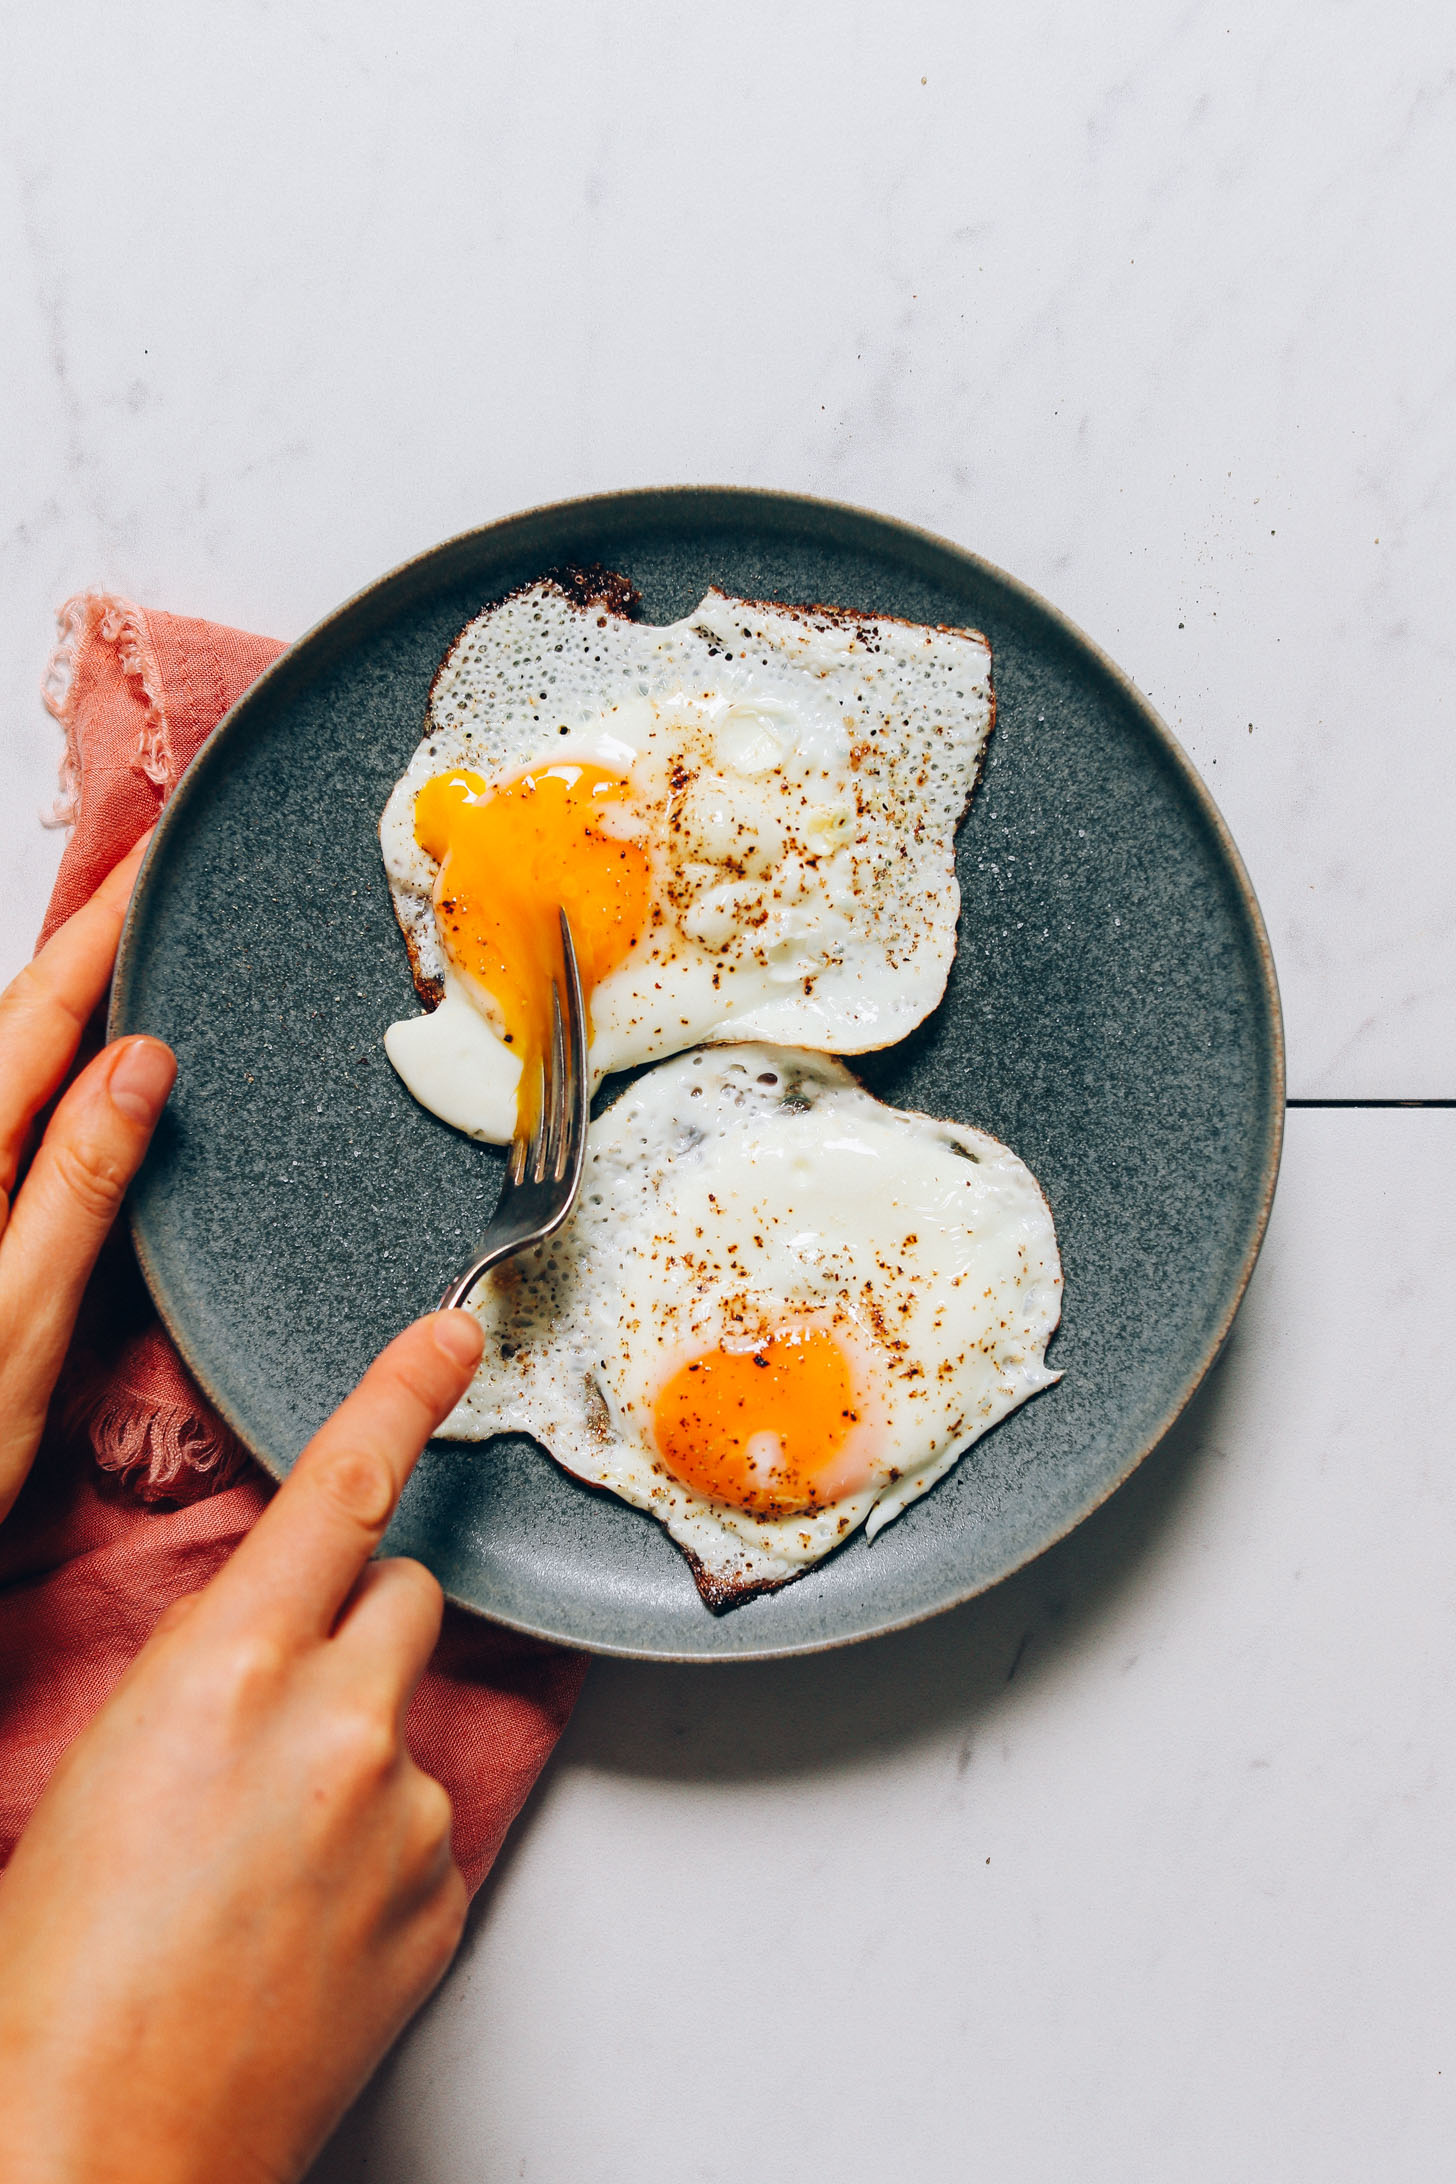 Plate of perfectly cooked sunny side up eggs for our tutorial on How to Cook an Egg